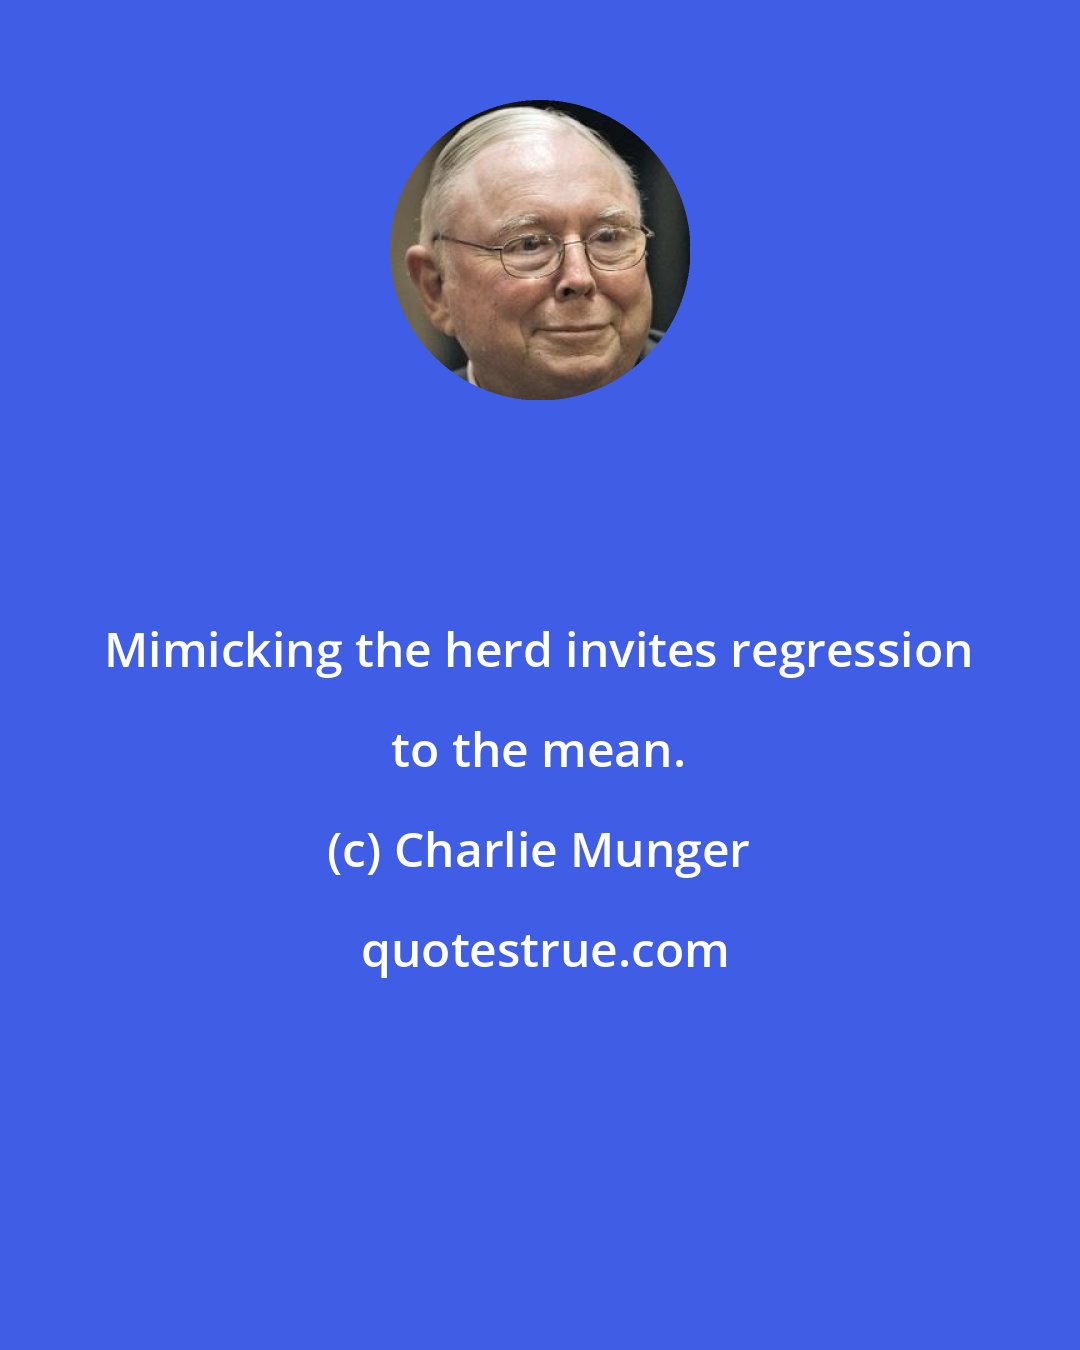 Charlie Munger: Mimicking the herd invites regression to the mean.